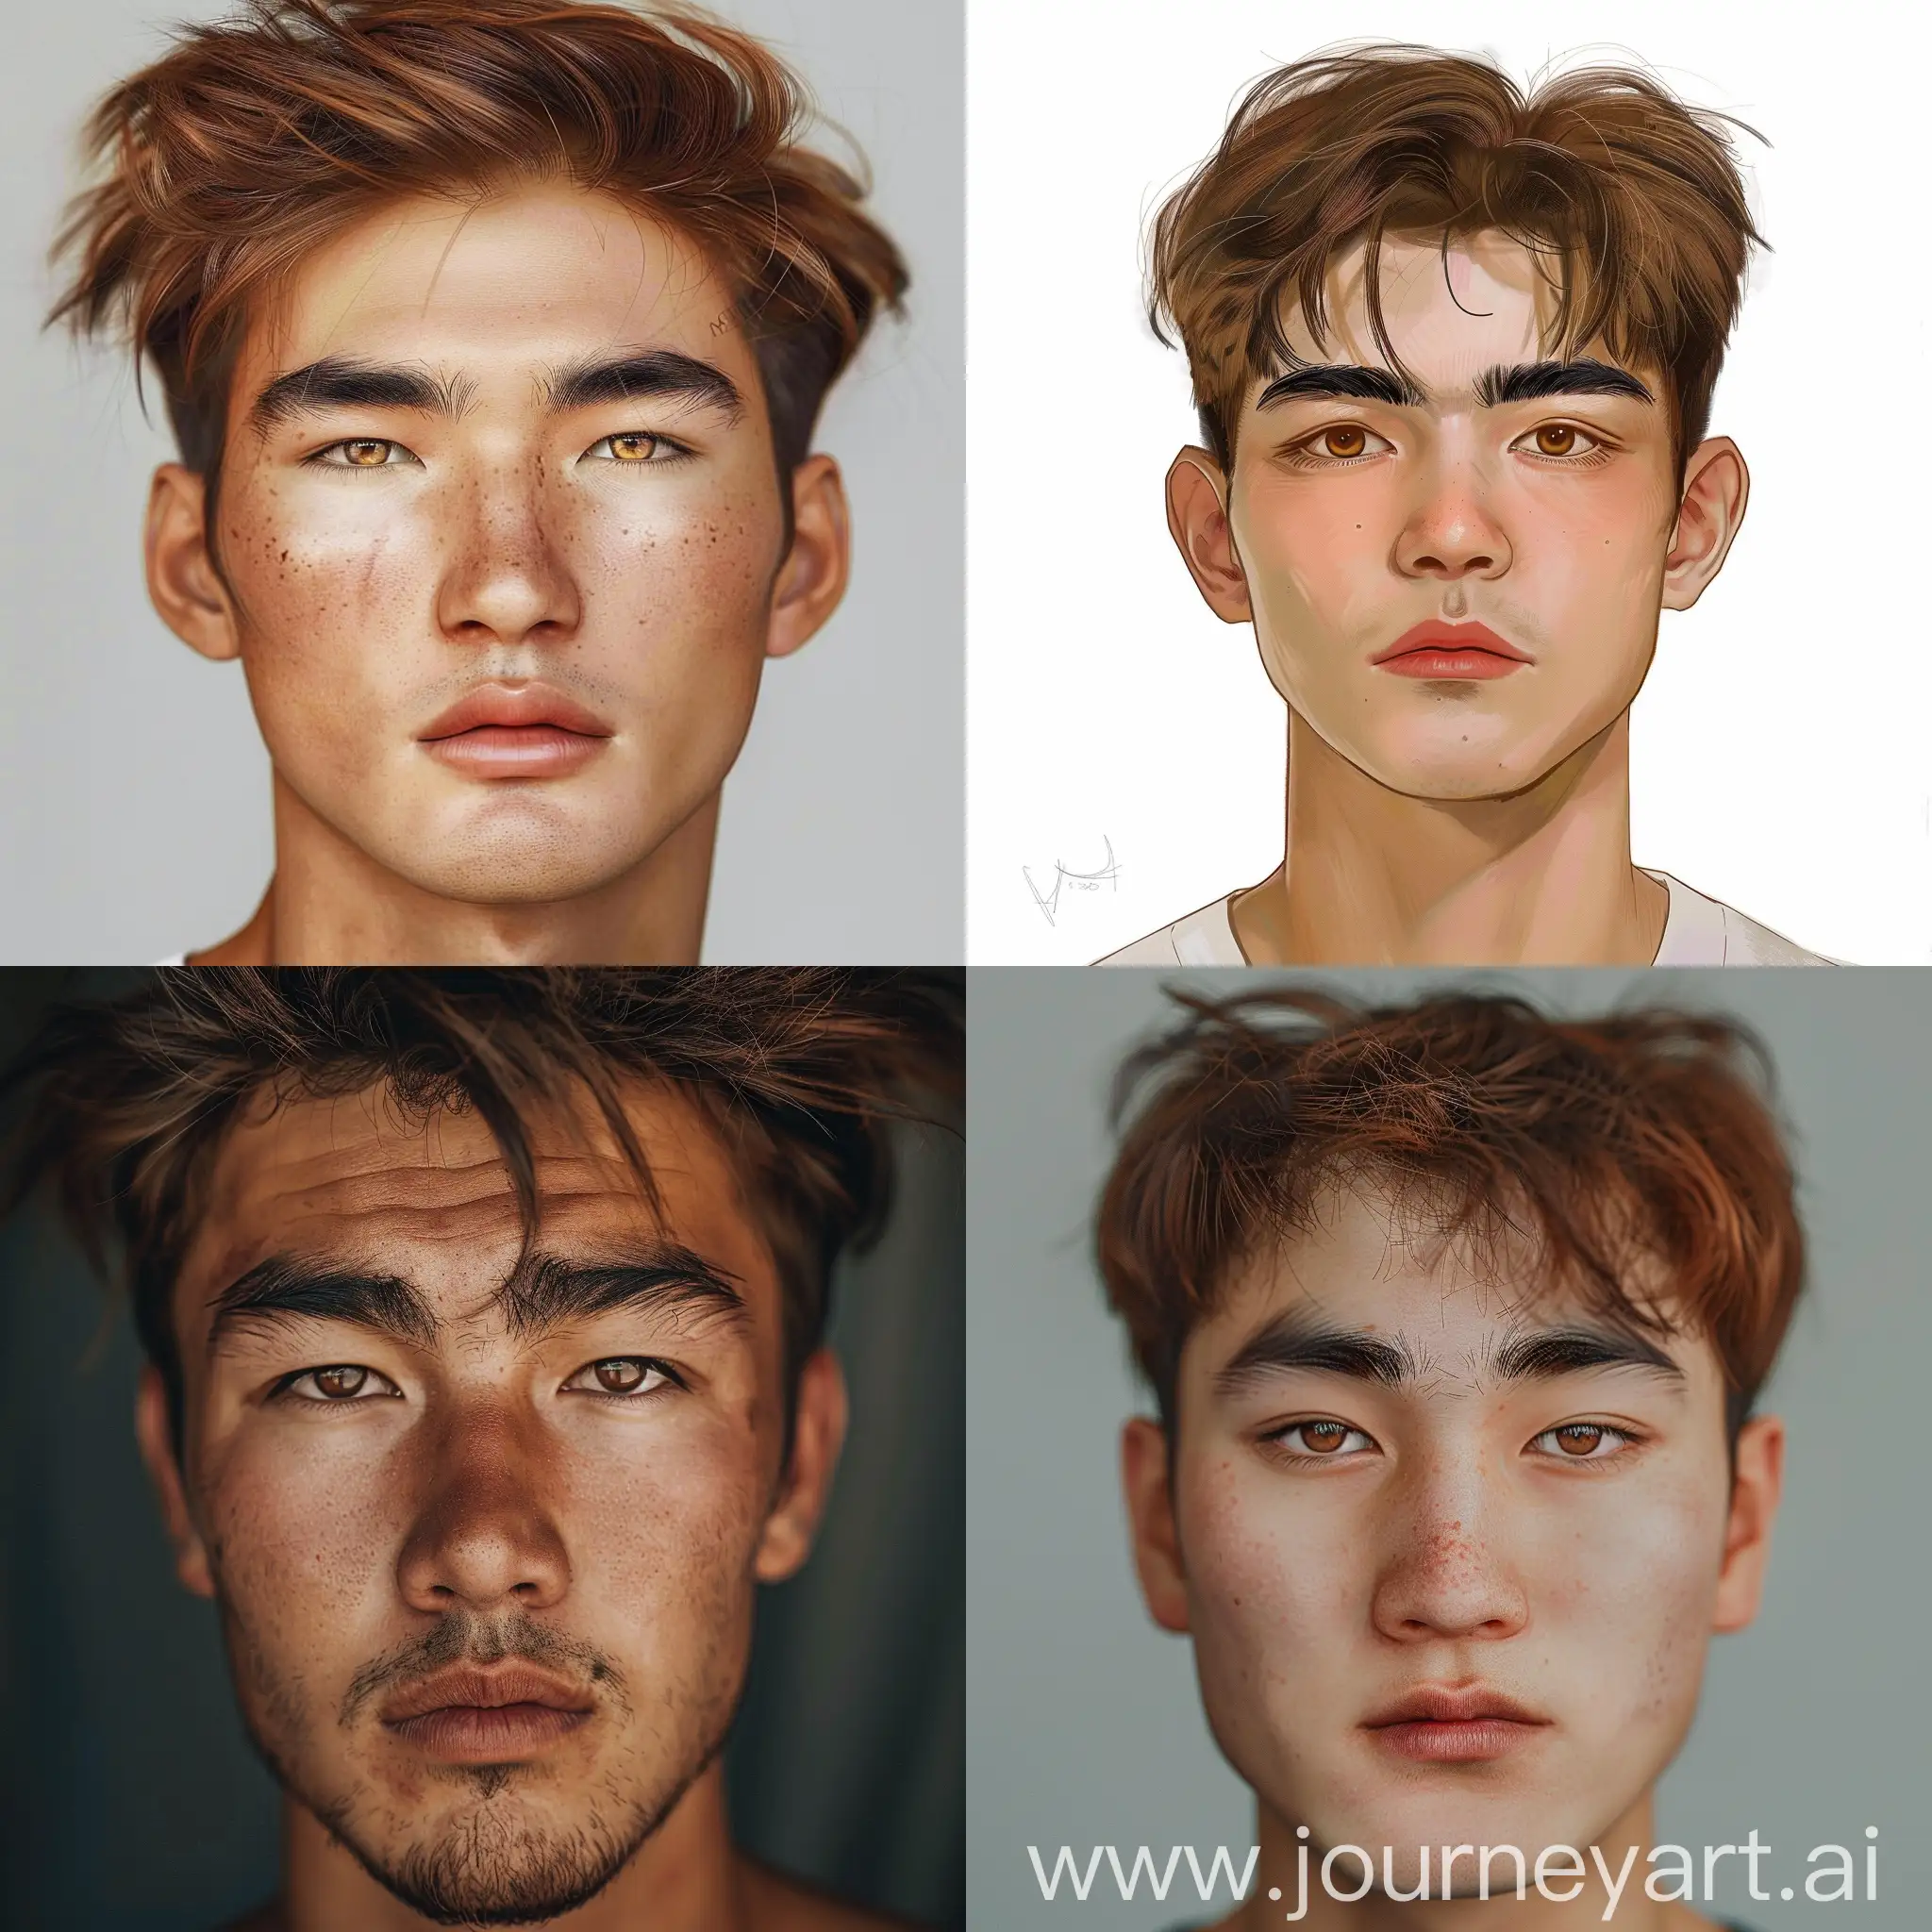 Uzbek guy, eyebrows wide but short, Asian nose, thick lips but thin on top, oval face, big ears, reddish-brown, brown hair, Kazakh eyes.